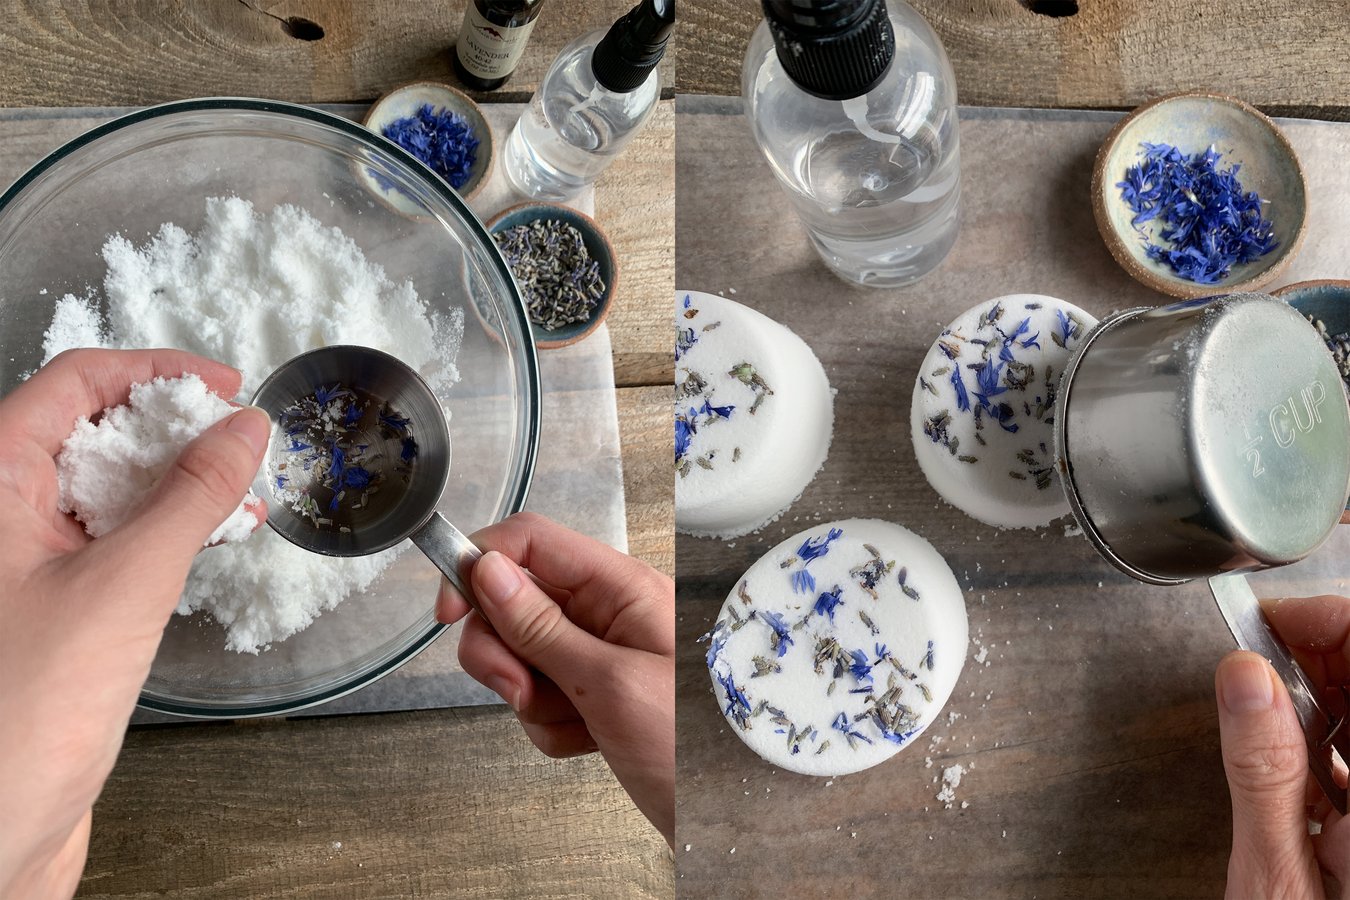 A person making lavender bath bombs, mixing the ingredients in a bowl, forming the bath bombs with a measuring cup, with fresh lavender sprinkled on top